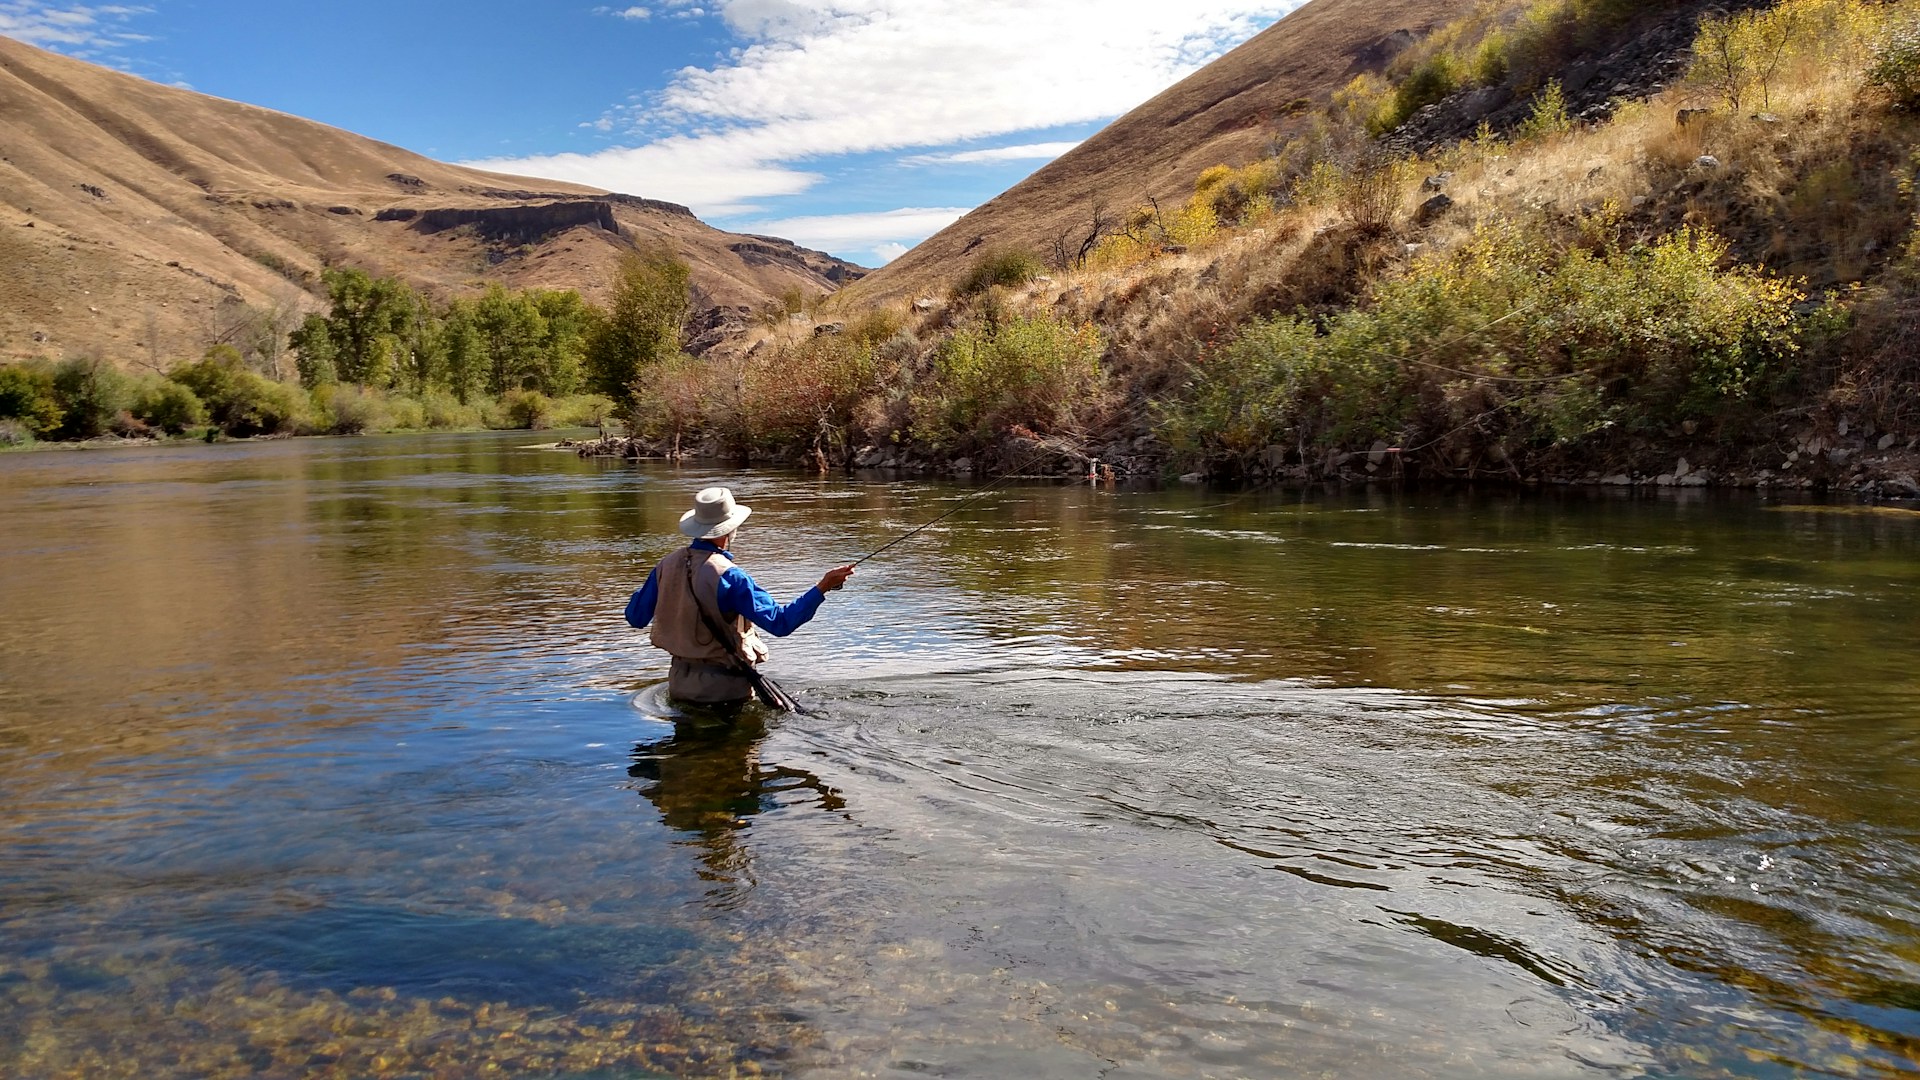 A person in waders and a wide-brimmed hat is fly fishing in a serene river, with a backdrop of gentle hills and scattered autumn-colored shrubs